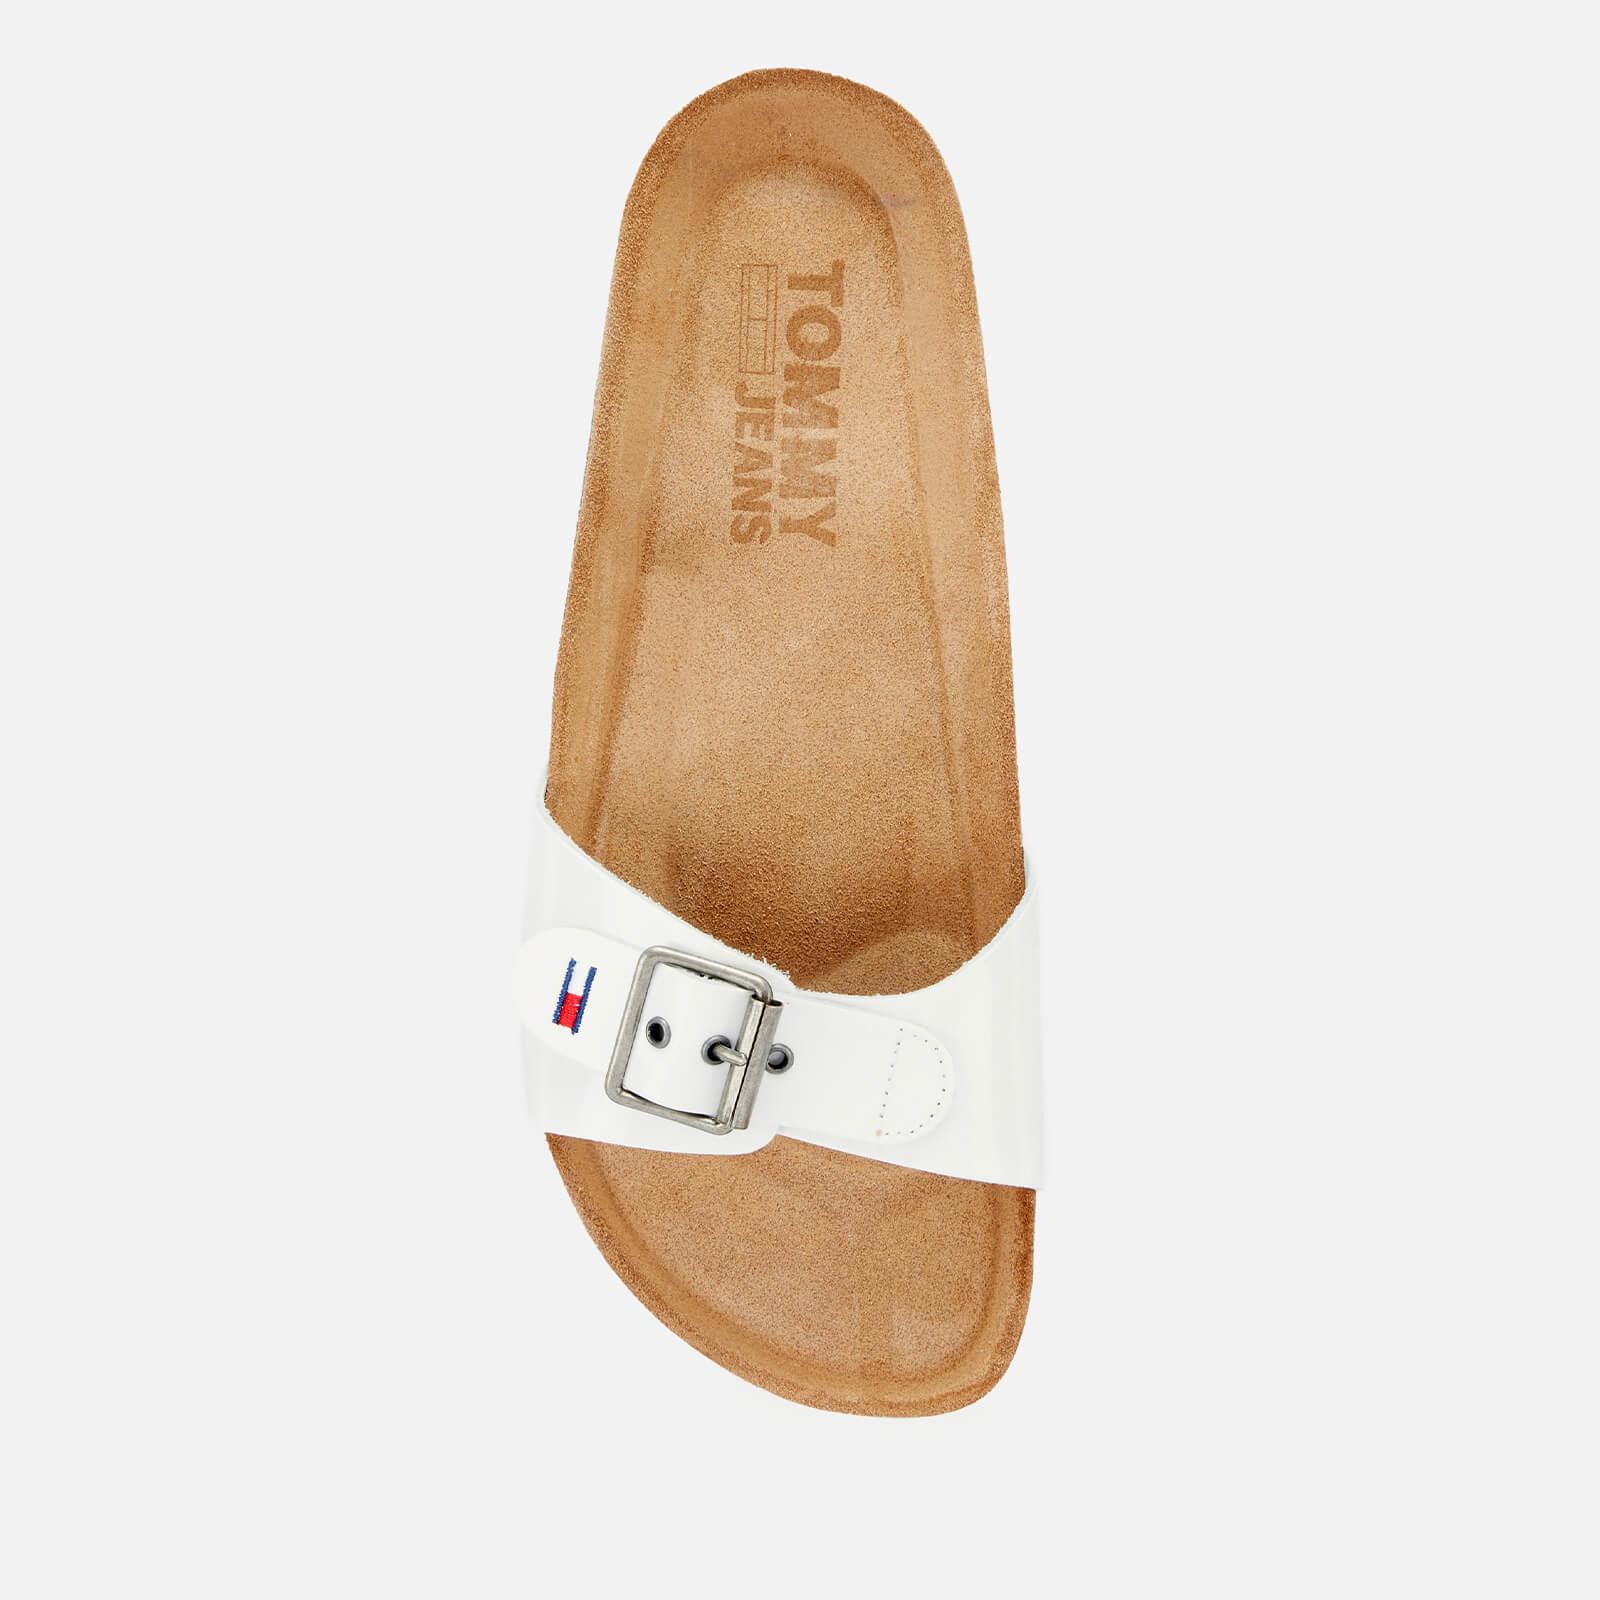 Tommy Hilfiger Flag Outsole Mule Sandals in White | Lyst